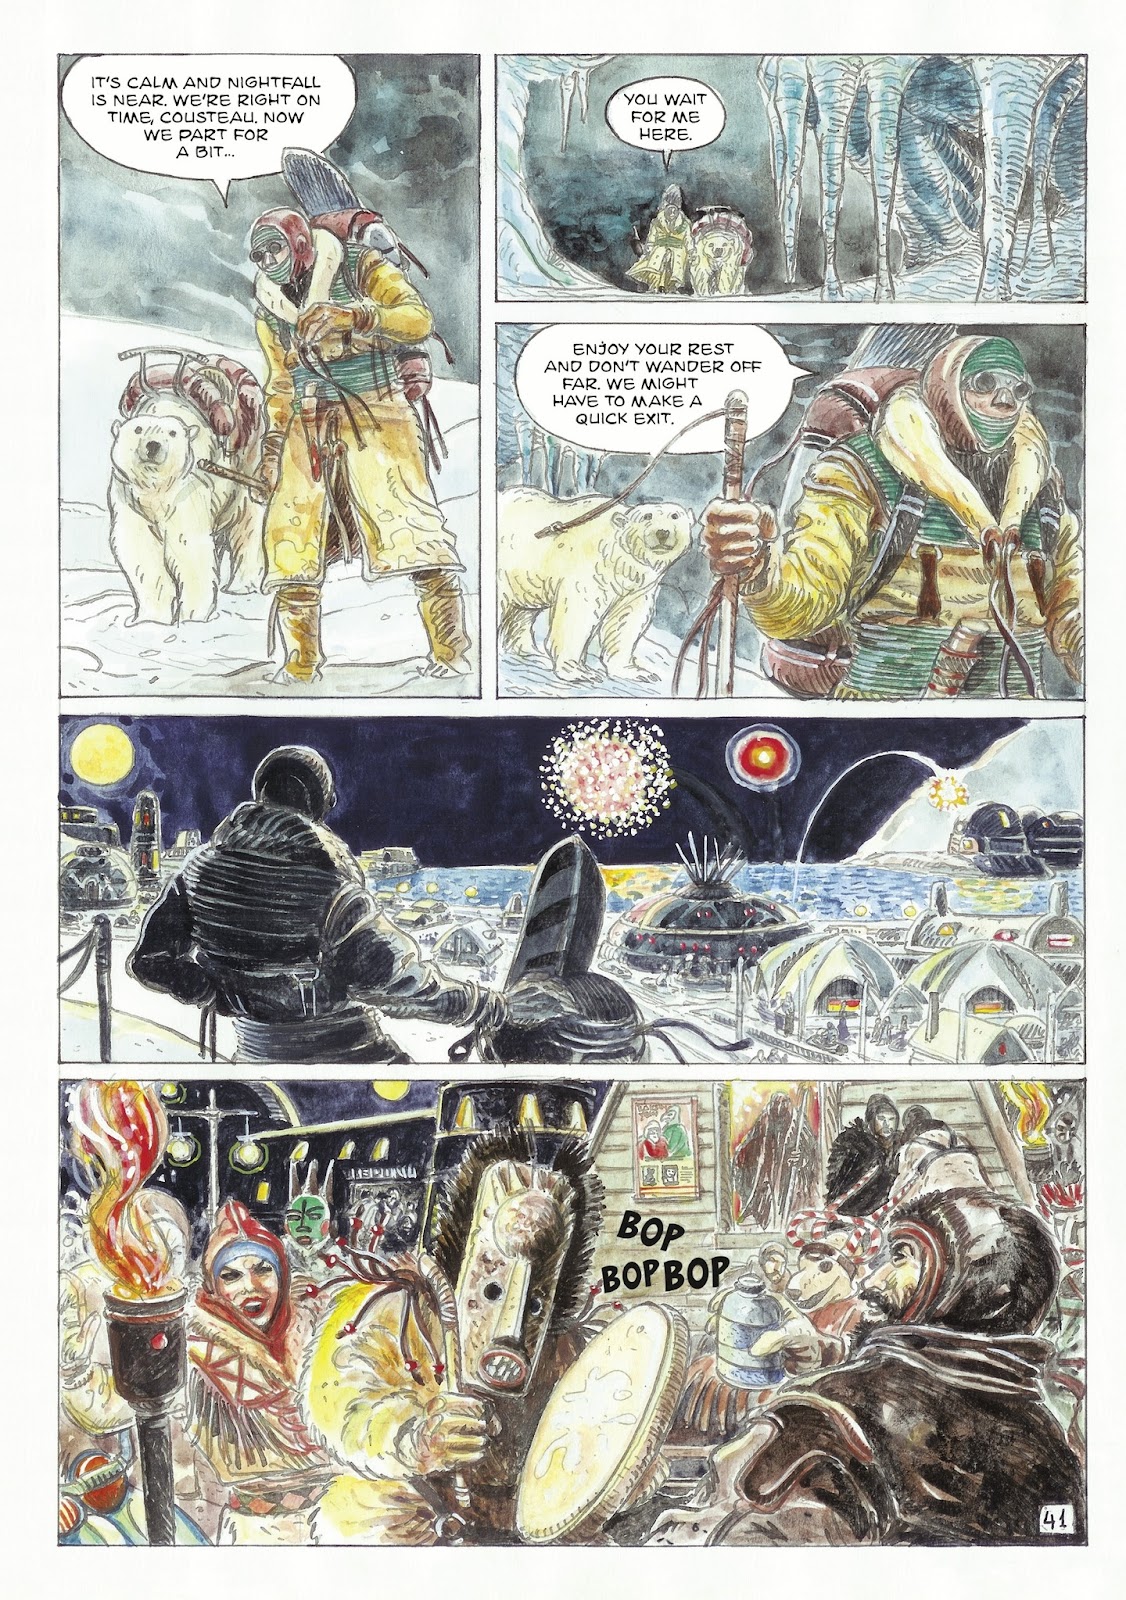 The Man With the Bear issue 1 - Page 43